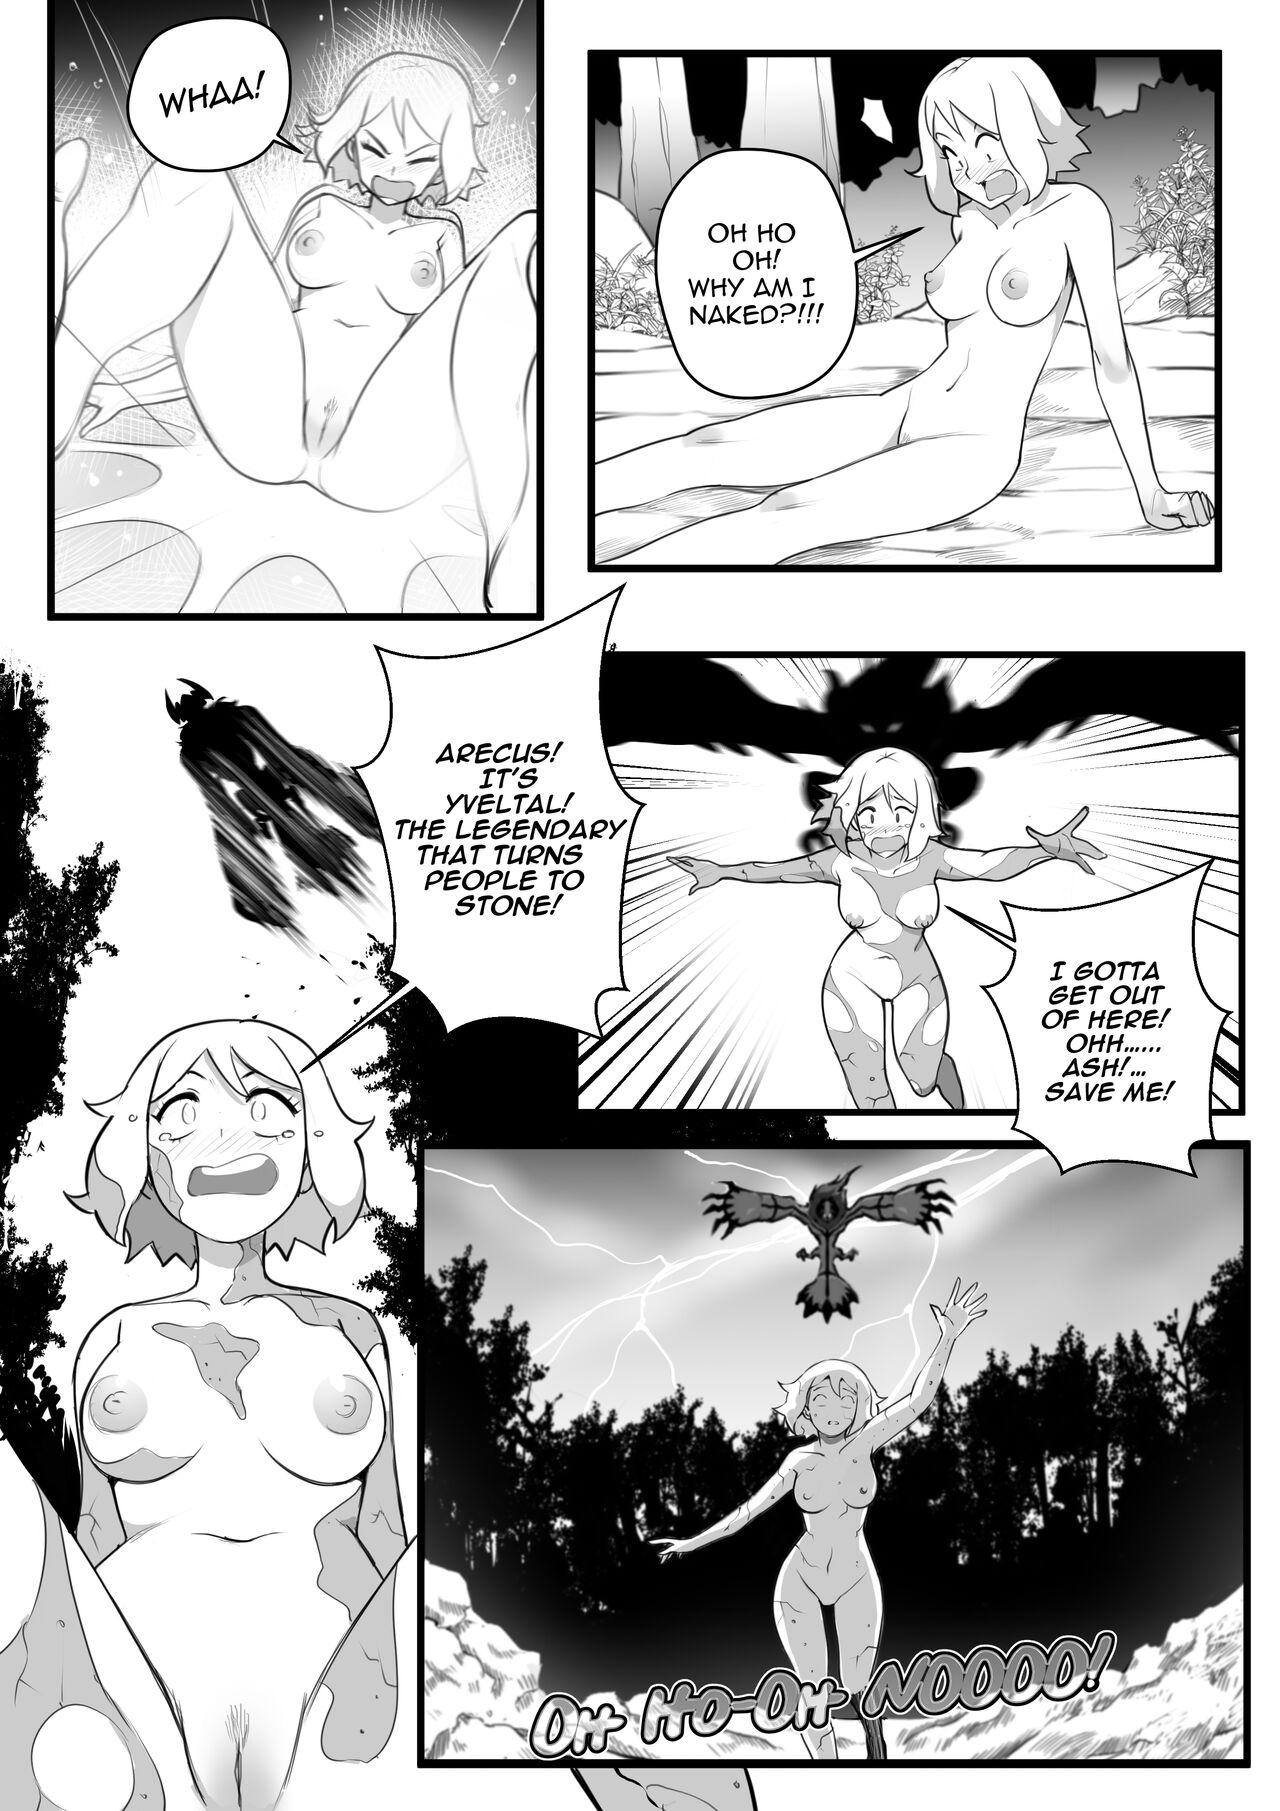 Office Serena: A Petrified Sacrifice though time! - Pokemon | pocket monsters Daddy - Page 3